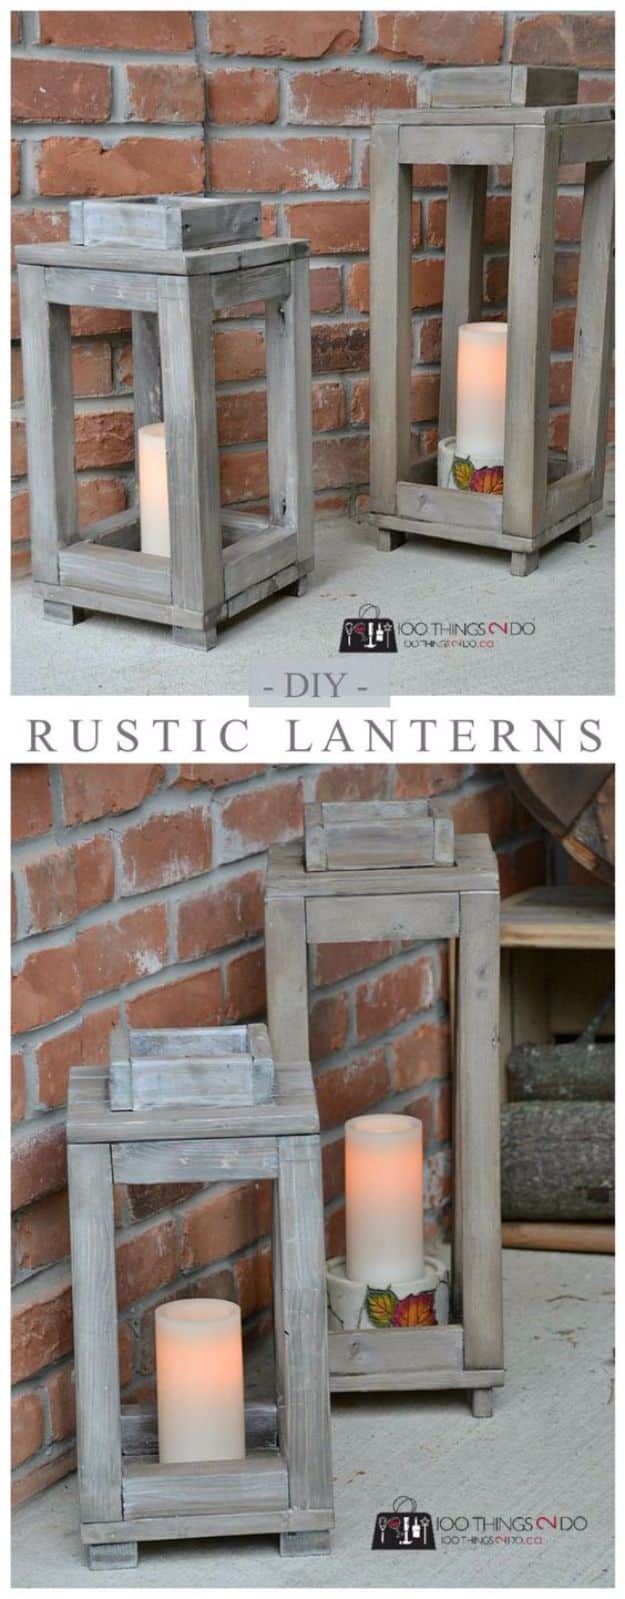 Best Country Decor Ideas for Your Porch - DIY Wood Lanterns - Rustic Farmhouse Decor Tutorials and Easy Vintage Shabby Chic Home Decor for Kitchen, Living Room and Bathroom - Creative Country Crafts, Furniture, Patio Decor and Rustic Wall Art and Accessories to Make and Sell 